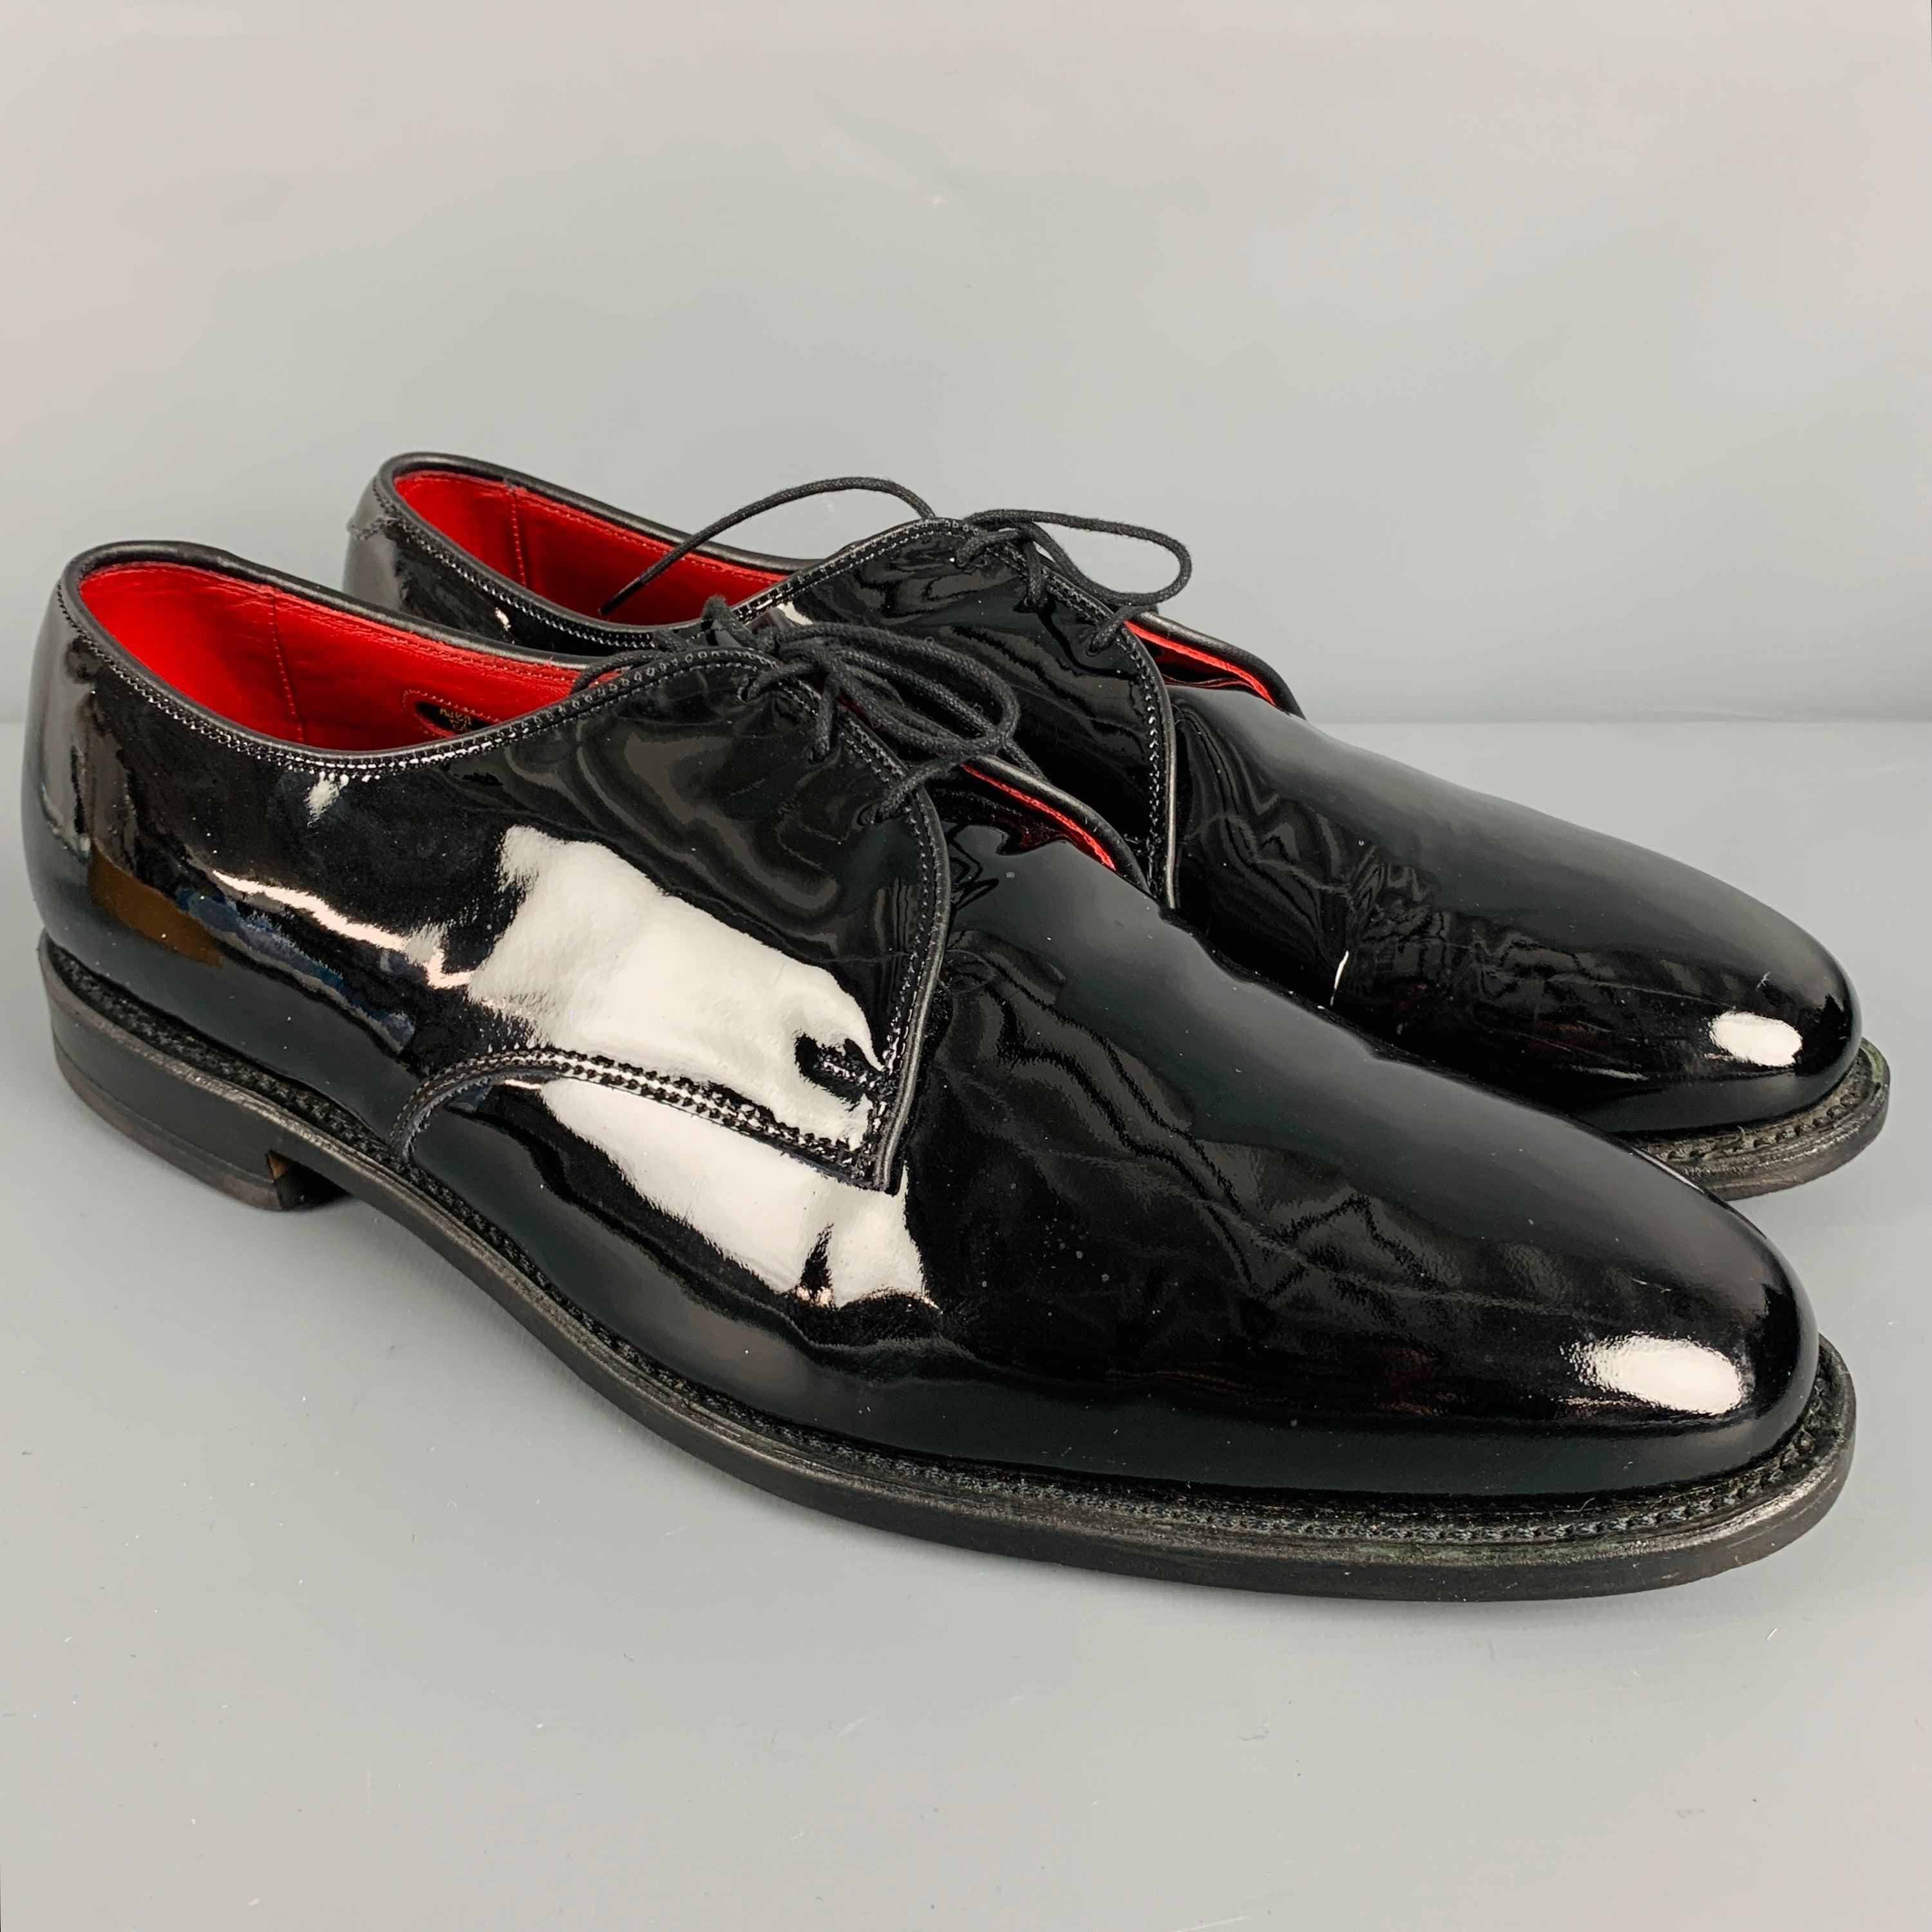 ALLEN EDMONDS shoes
in black patent leather featuring a lace-up closure. Comes with box. Made in USA.Very Good Pre-Owned Condition. Minor signs of wear. 

Marked:   13 D 5304 0000064Outsole: 13 x 4.25 inches 
  
  
 
Reference No.: 128951
Category: